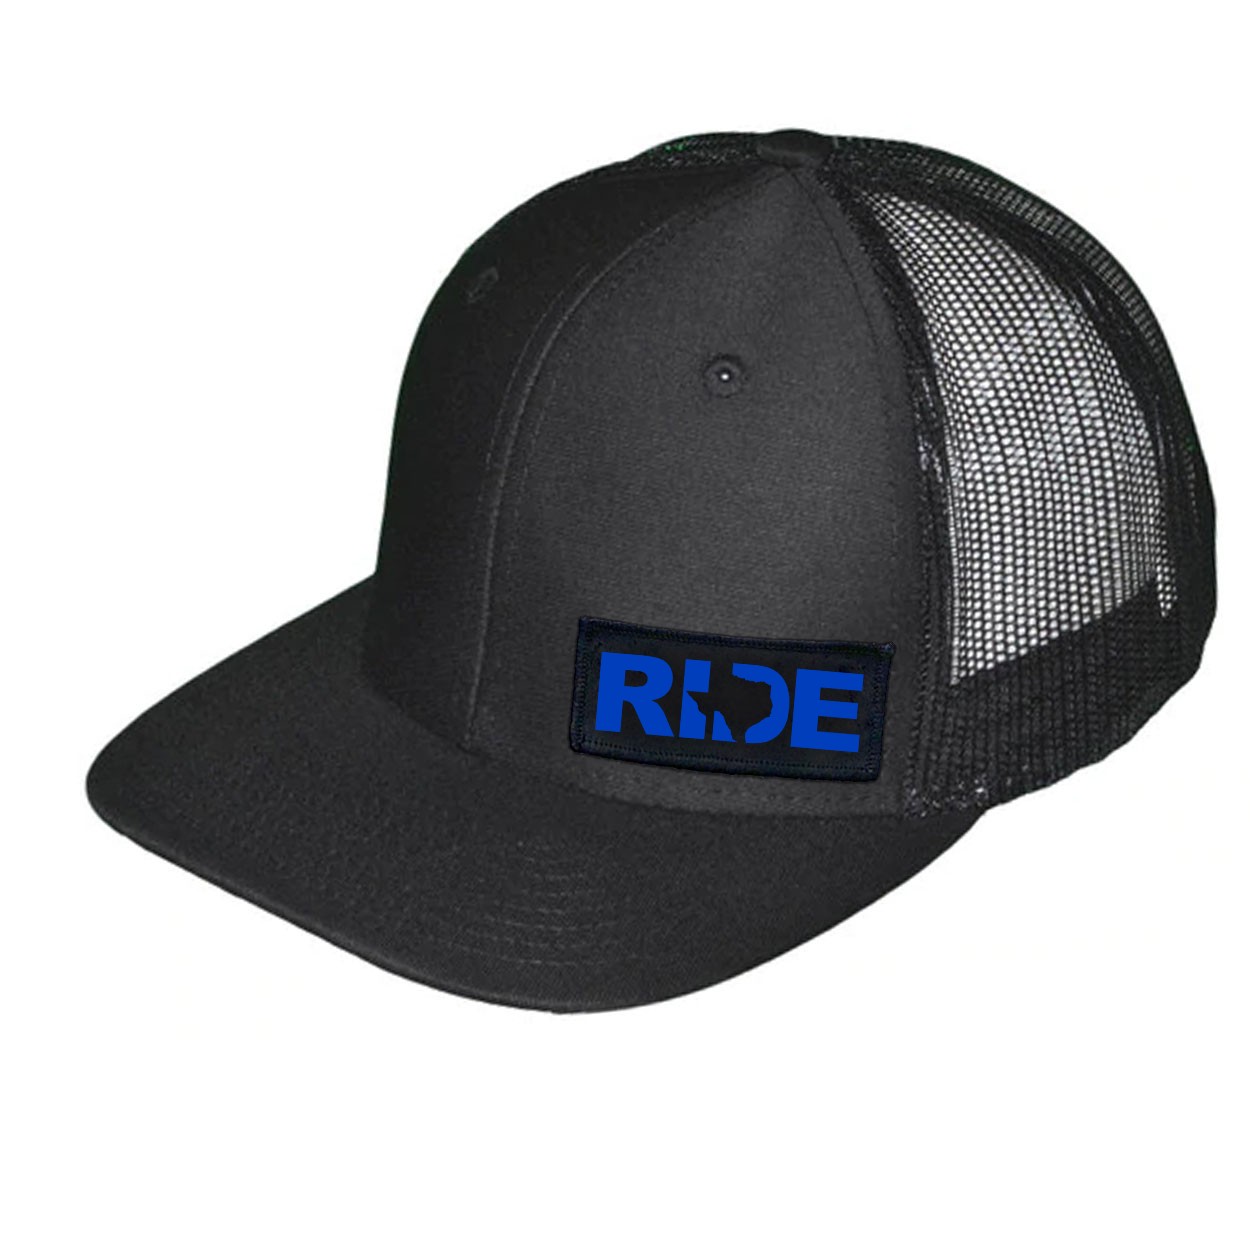 Ride Texas Night Out Woven Patch Snapback Trucker Hat Black (Blue Logo)